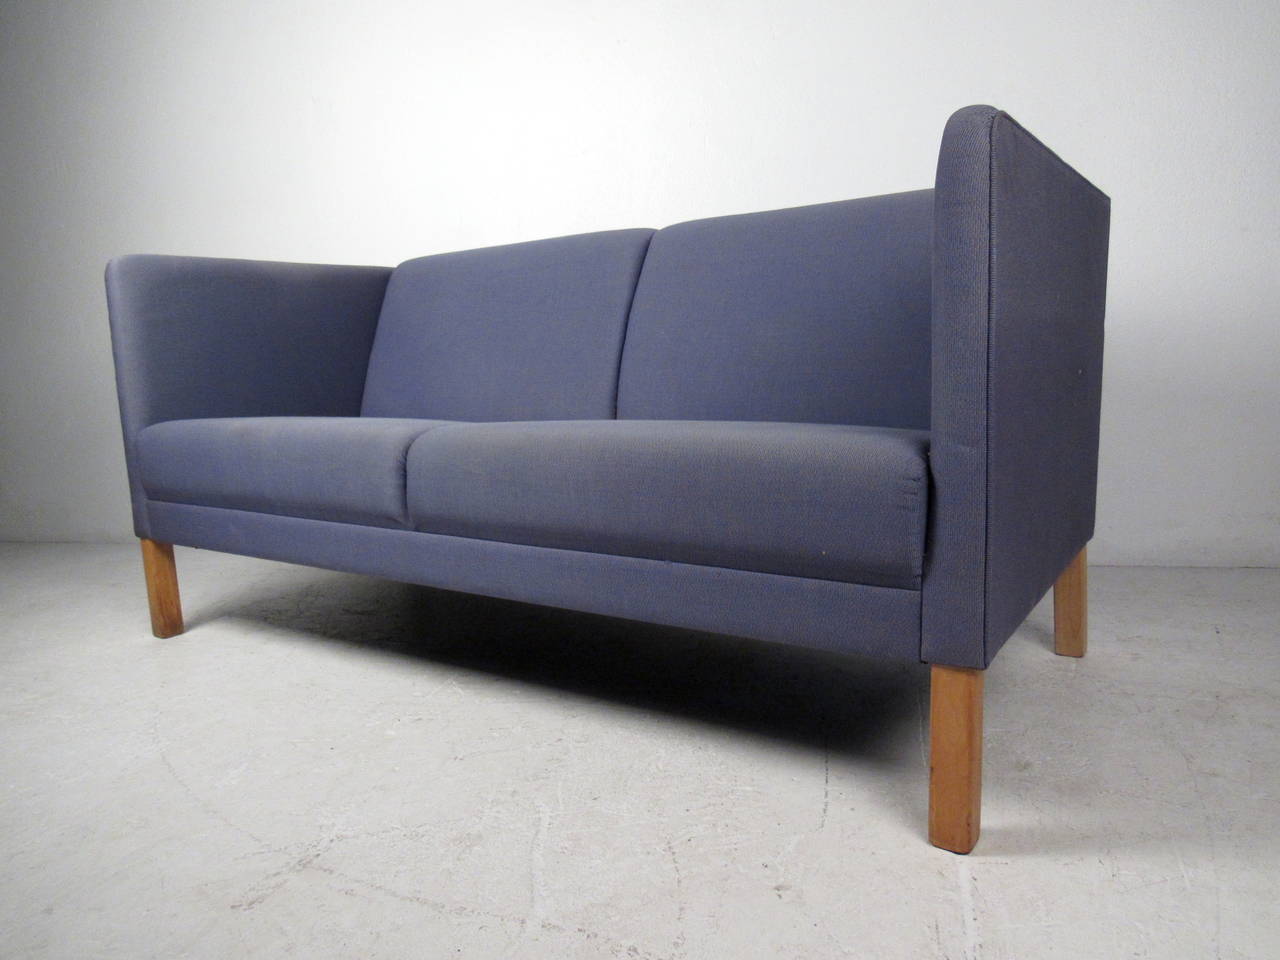 Danish Modern Sofa Loveseat In Good Condition For Sale In Brooklyn, NY